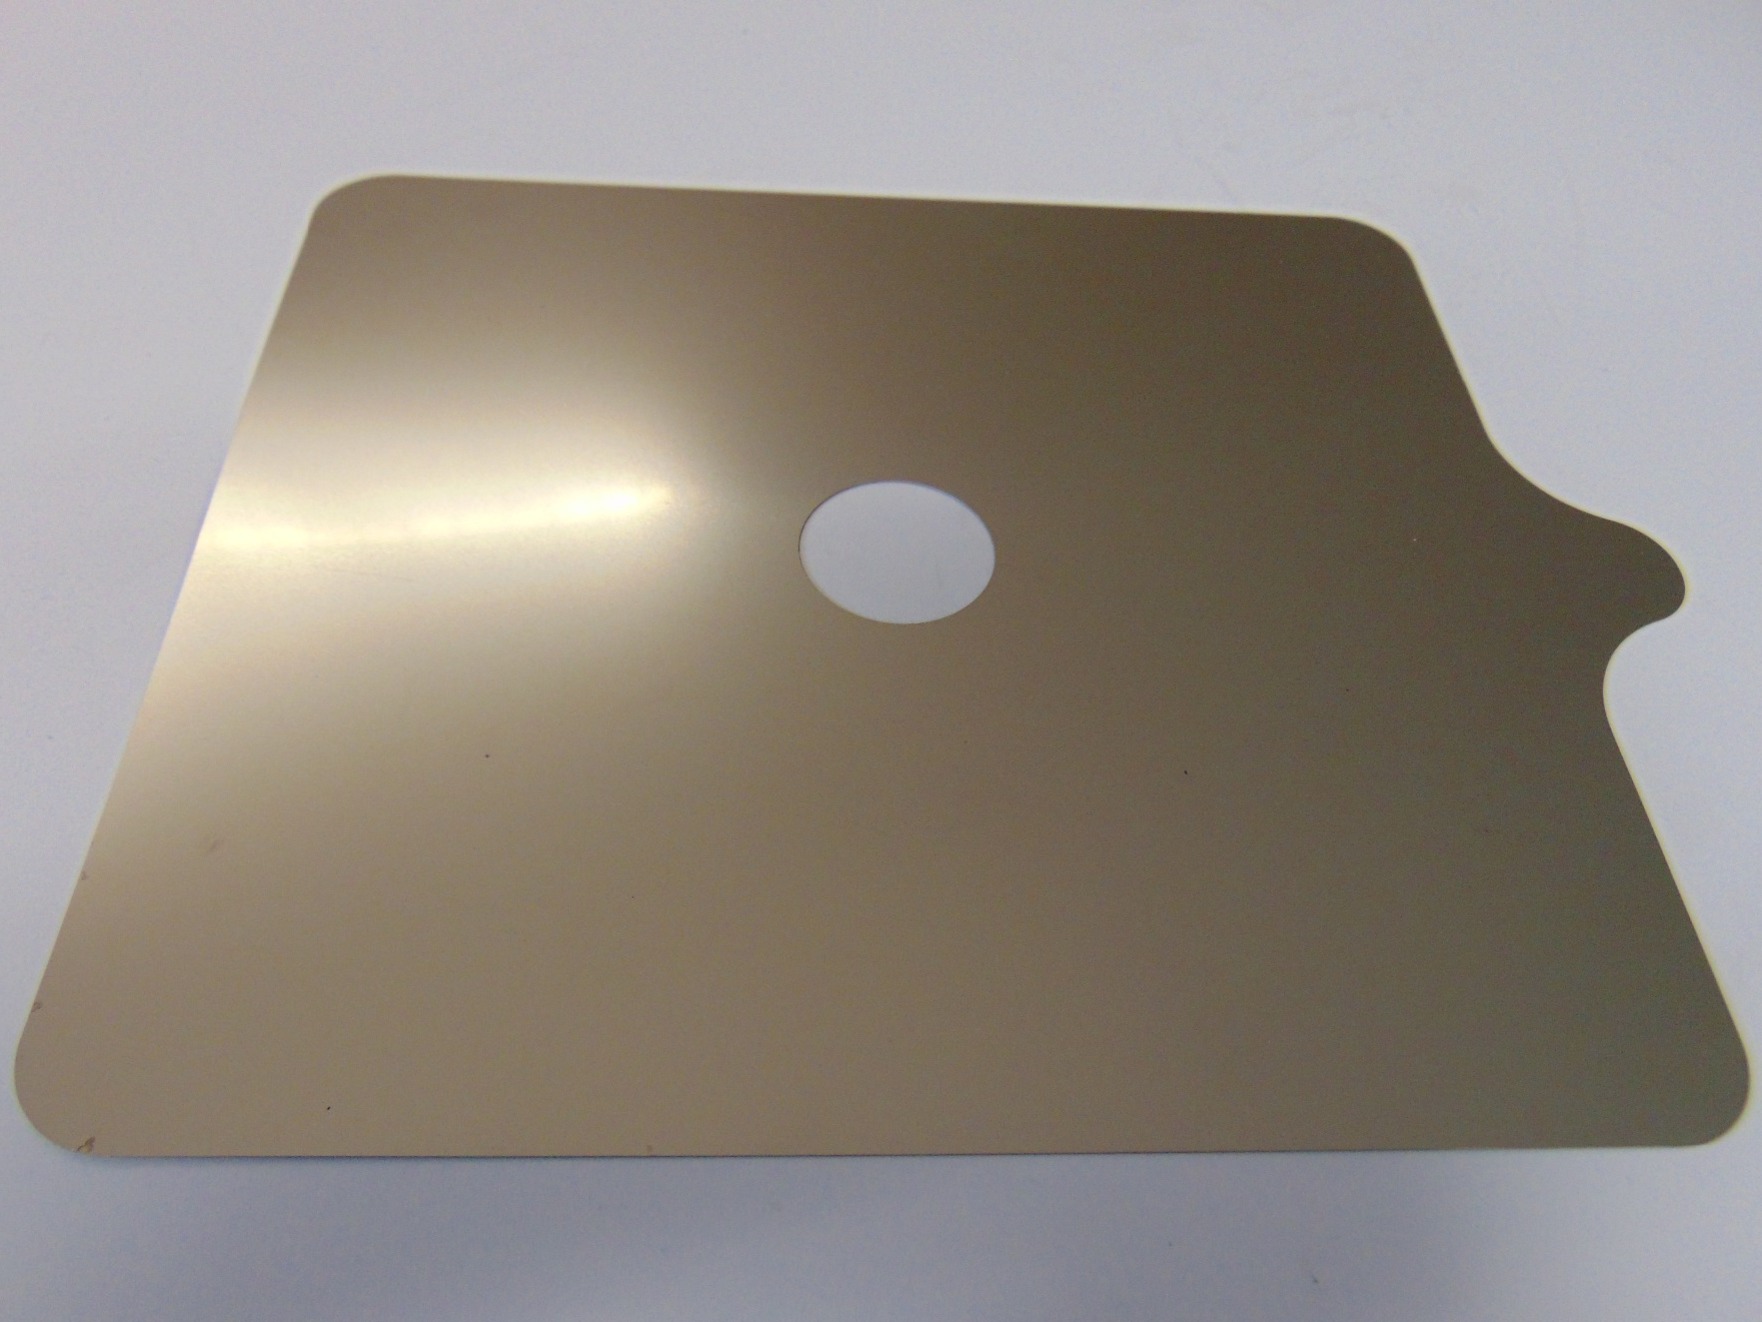 Etch Tech: Manufacturers of High Quality Metal Gaskets, Made Using the Chemical Etching Process